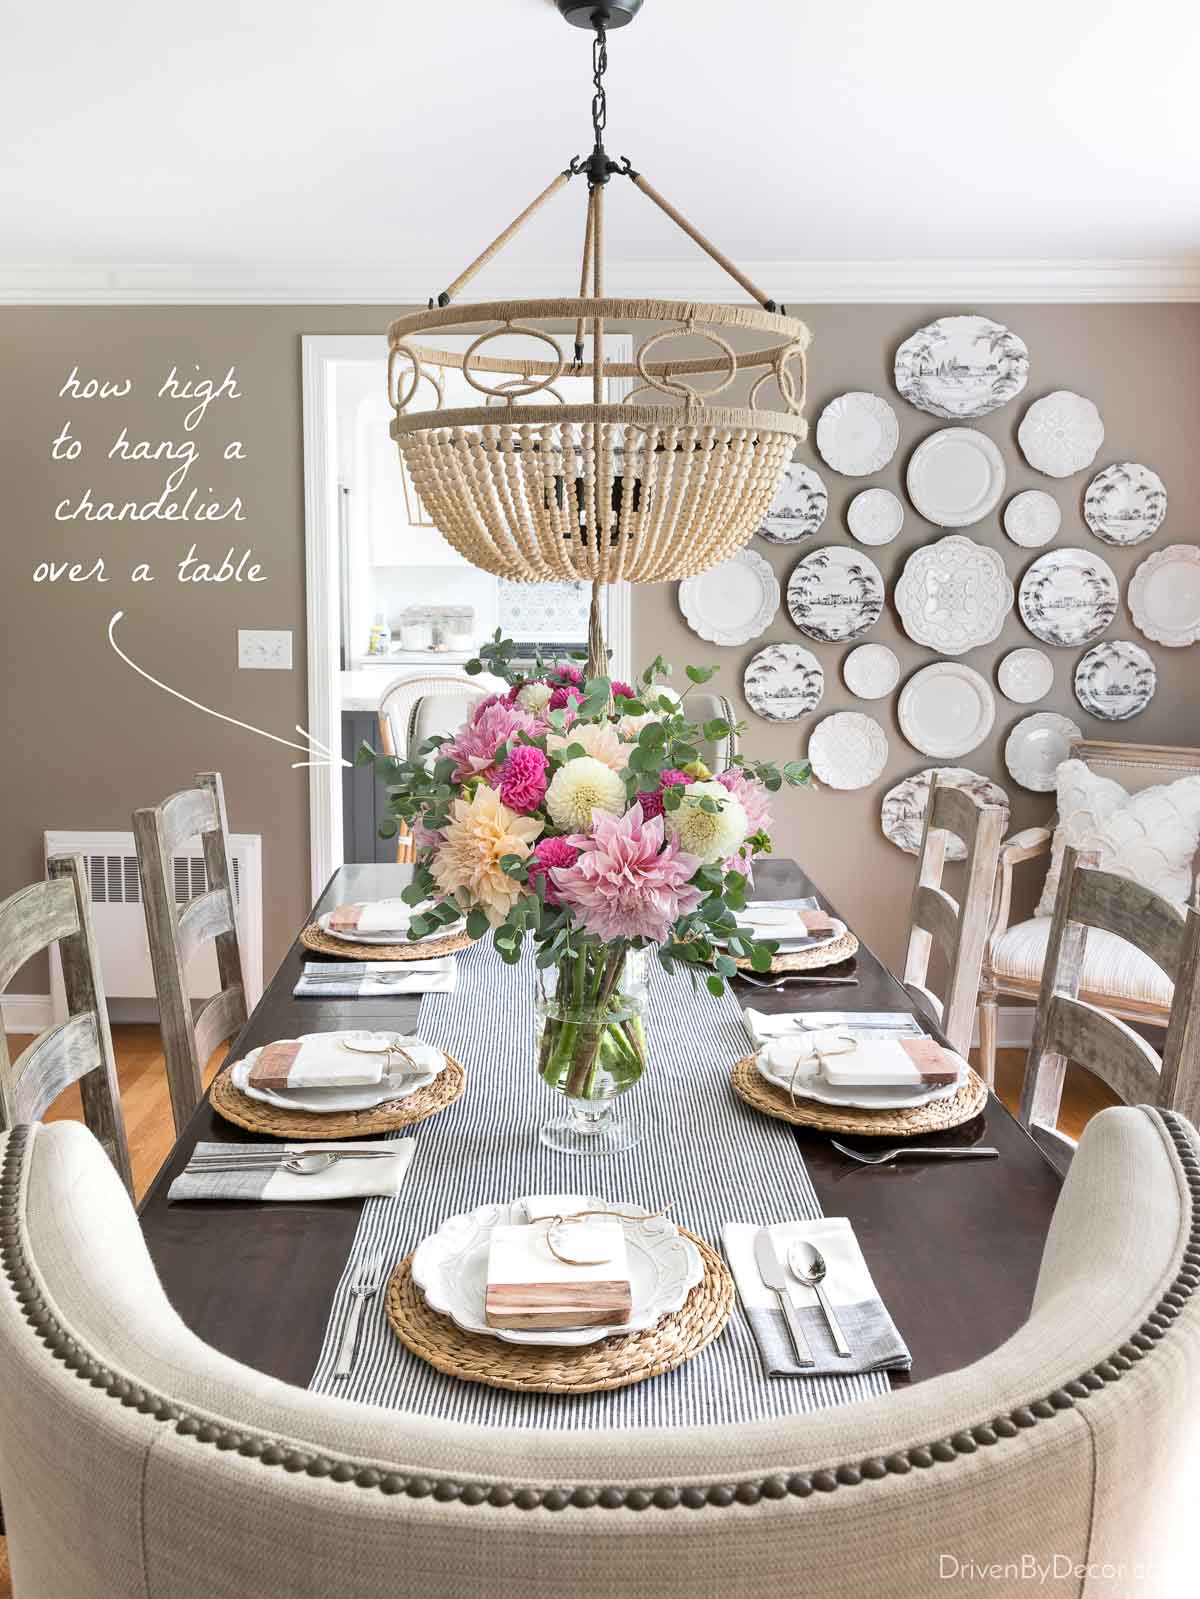 How high to hang a chandelier above a table